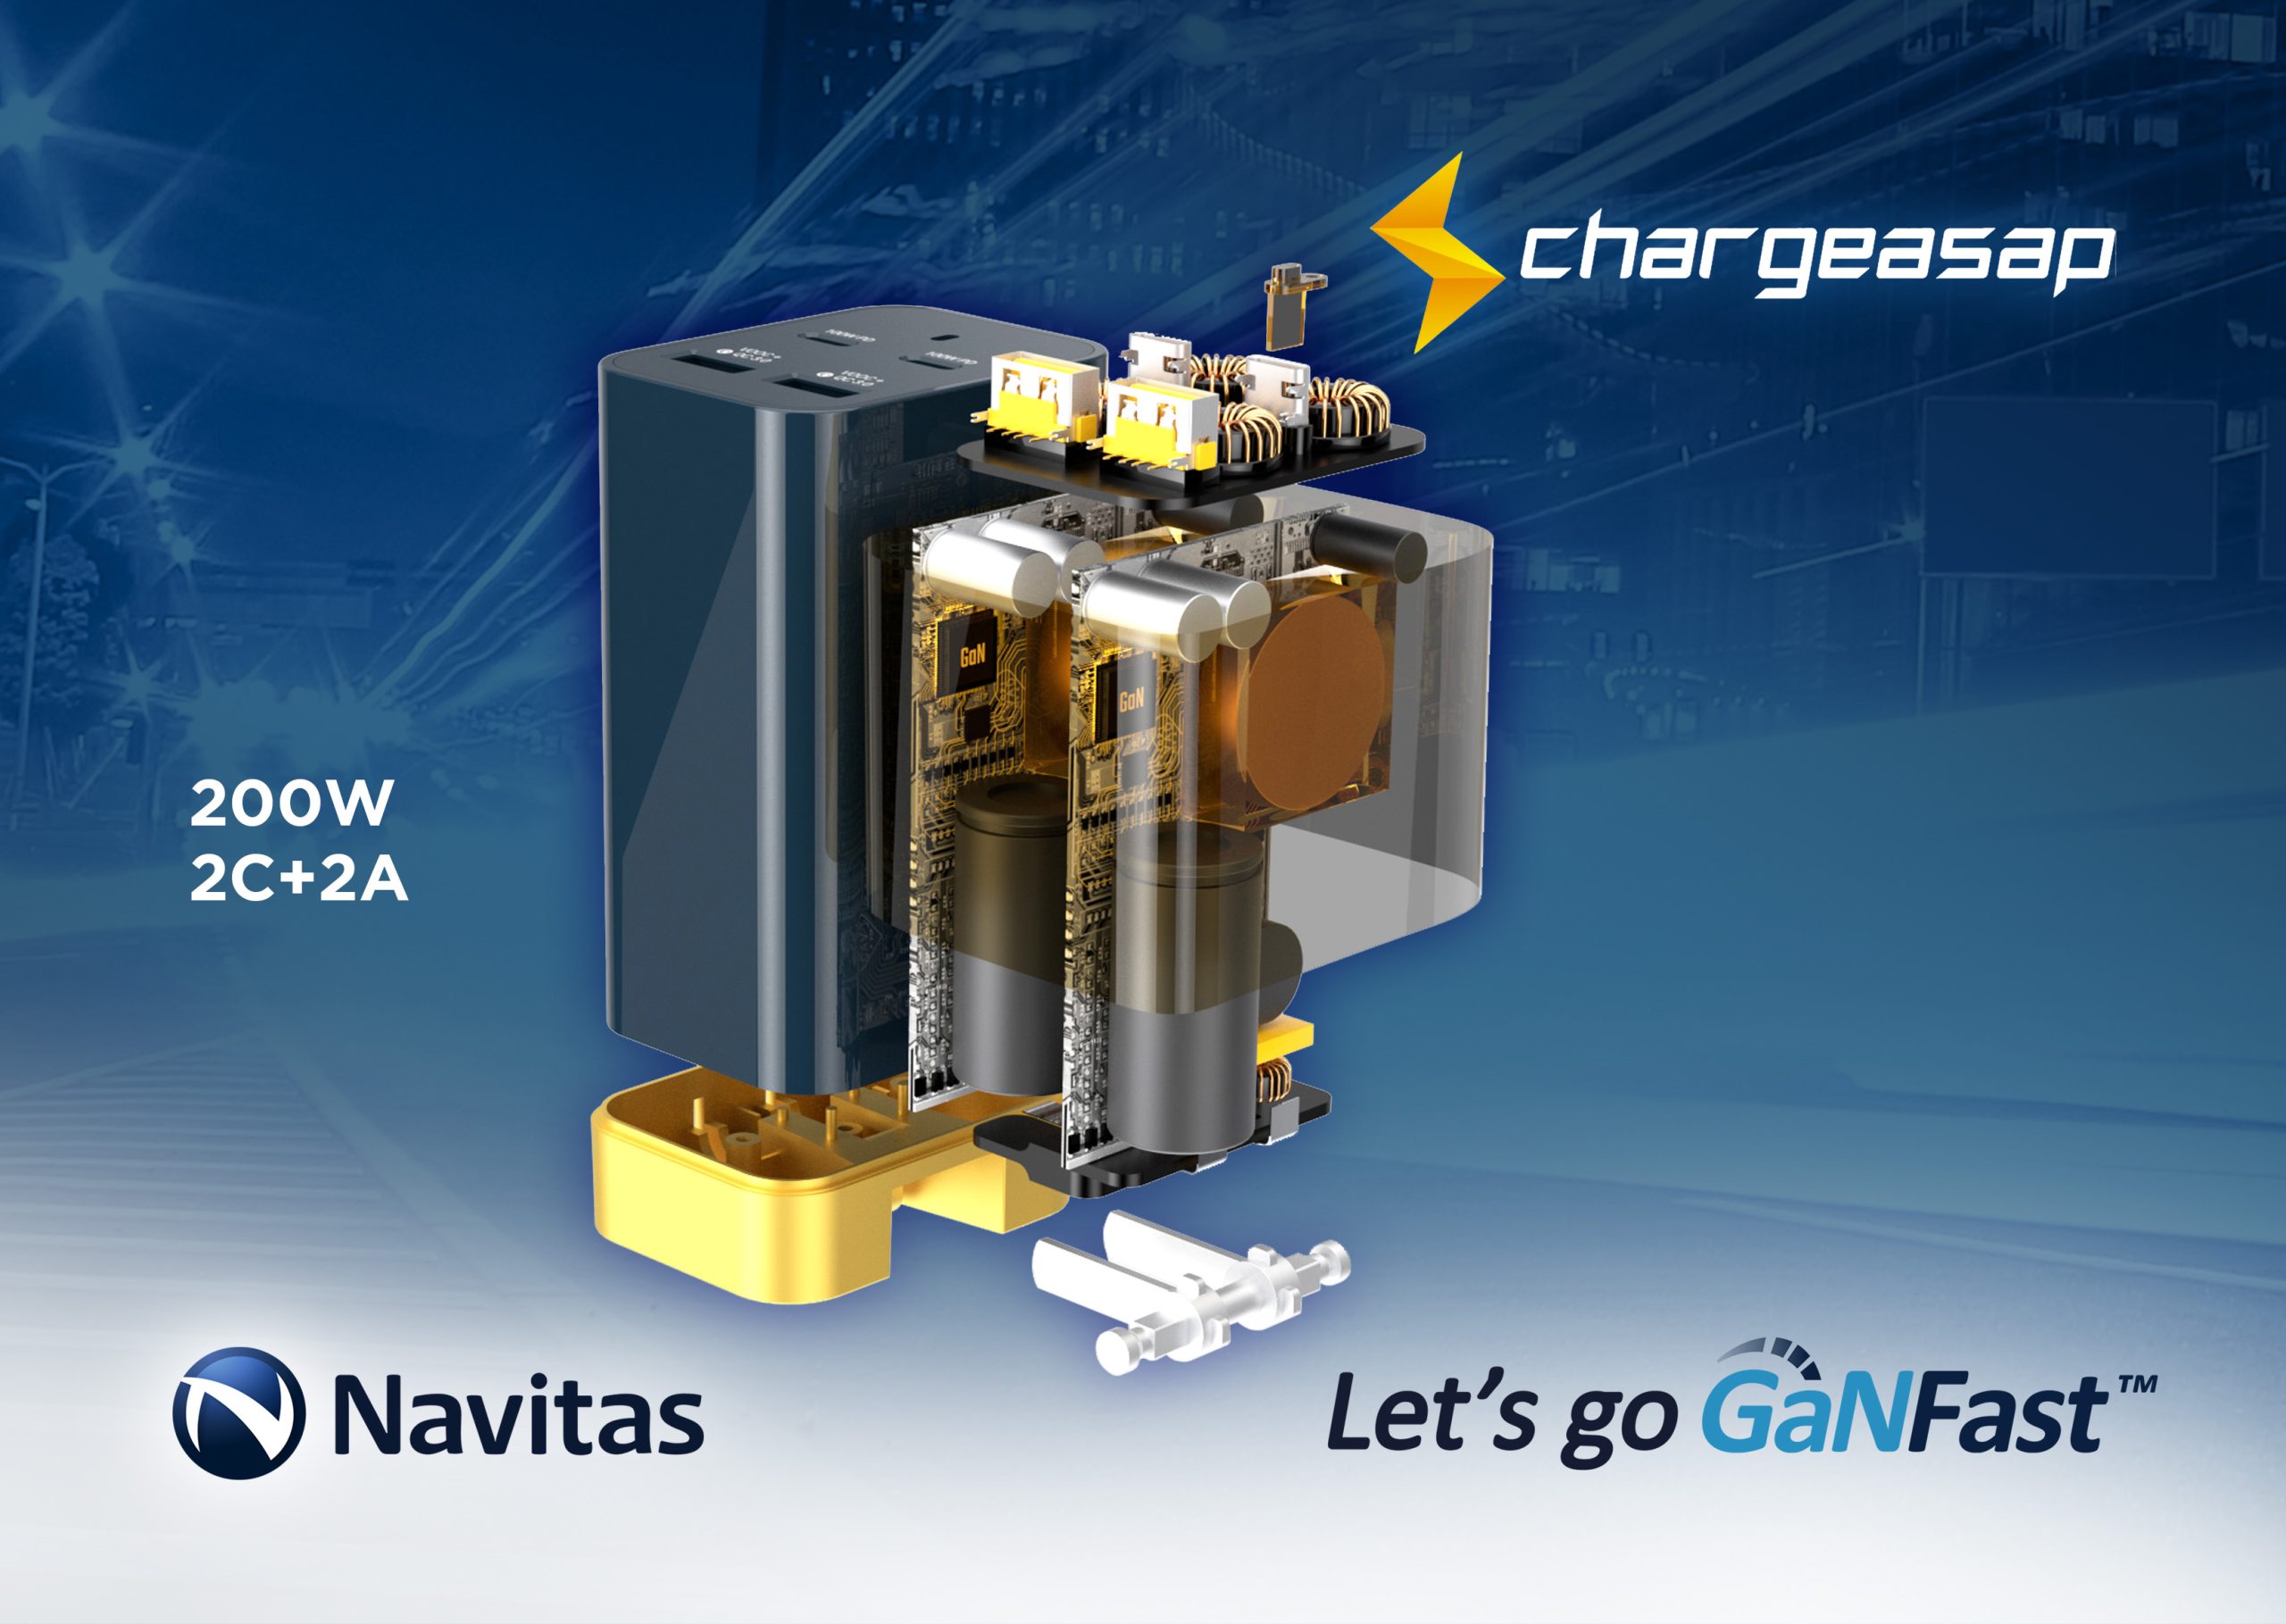 Chargeasap Omega: World’s Most Powerful Multi-port GaN Fast Charger.